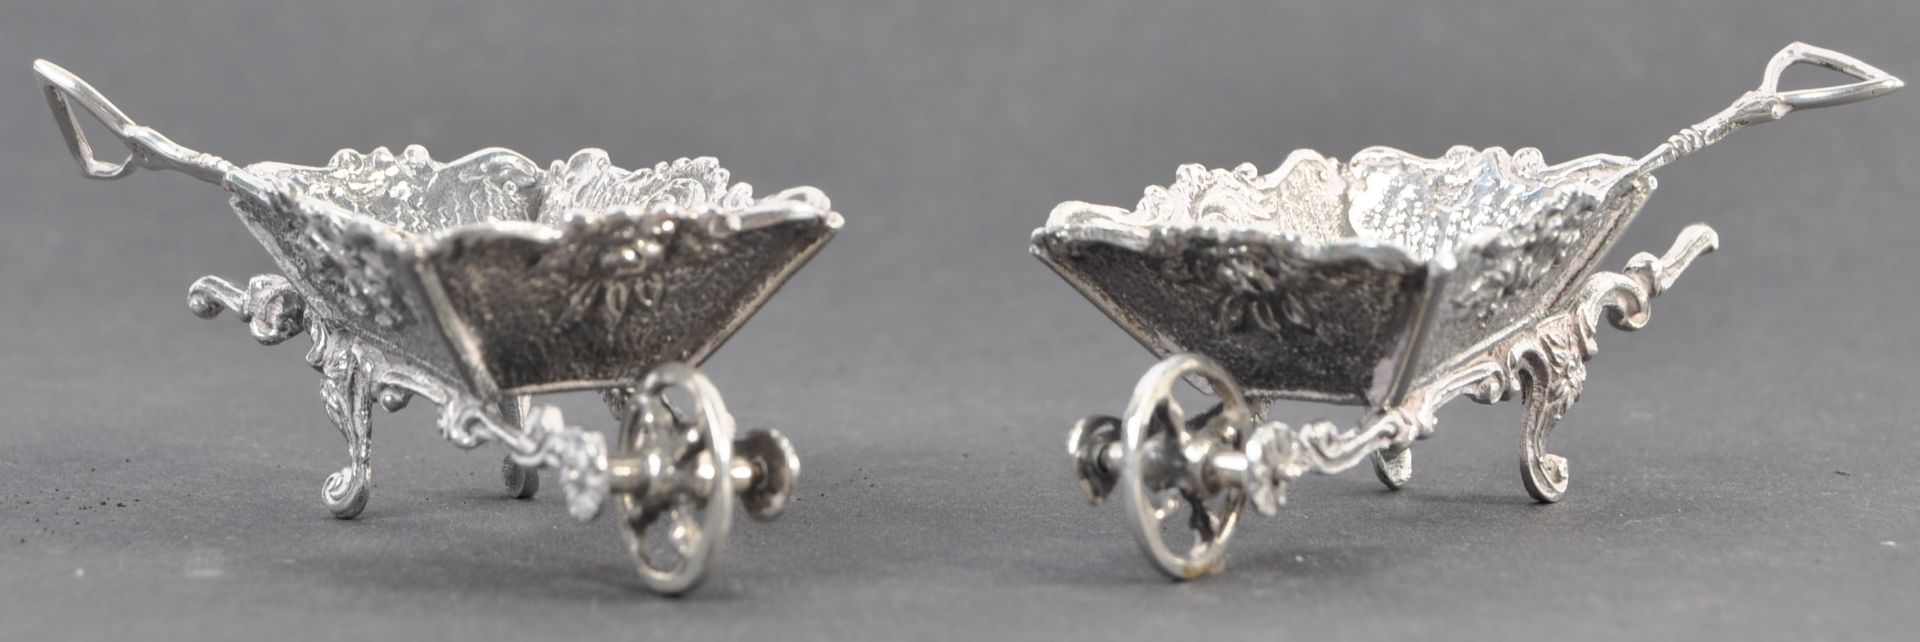 PAIR OF EDWARDIAN NOVELTY SILVER TABLE SALTS IN THE FORM OF WHEELBARROWS